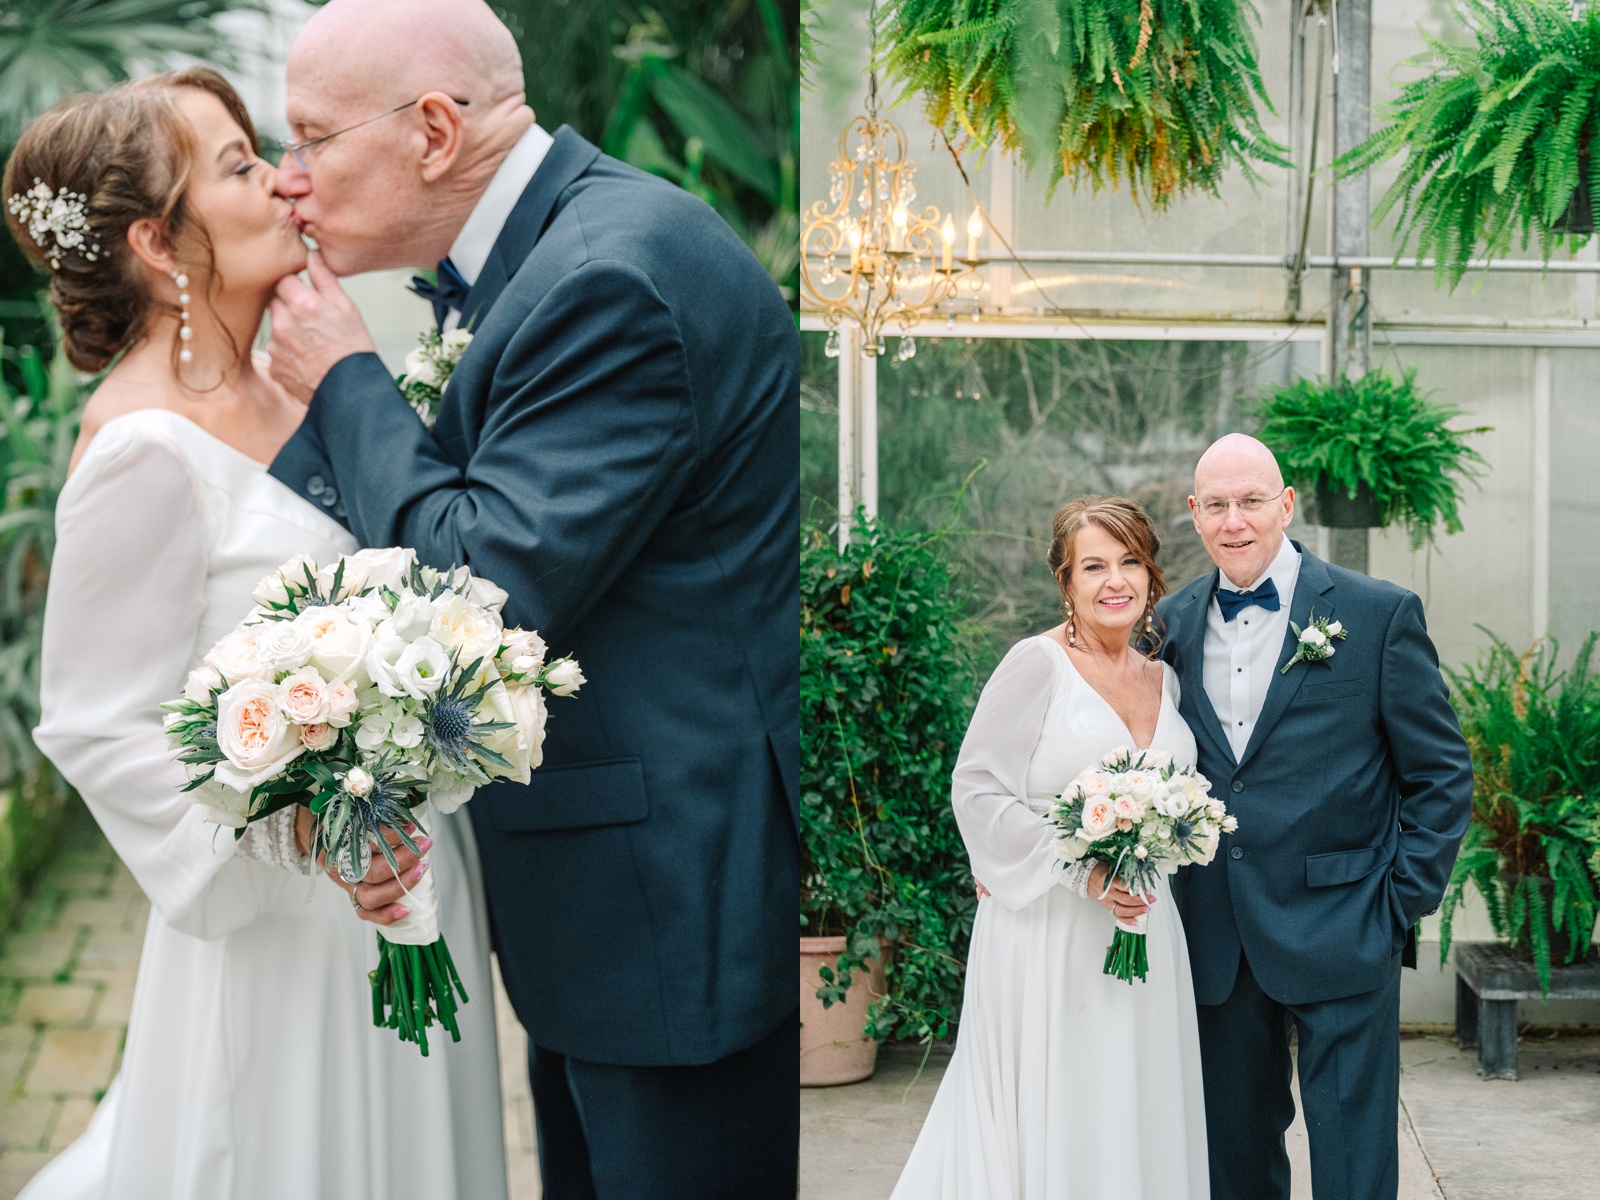 Mohican Garden and Conservatory Greenhouse Wedding in Ohio